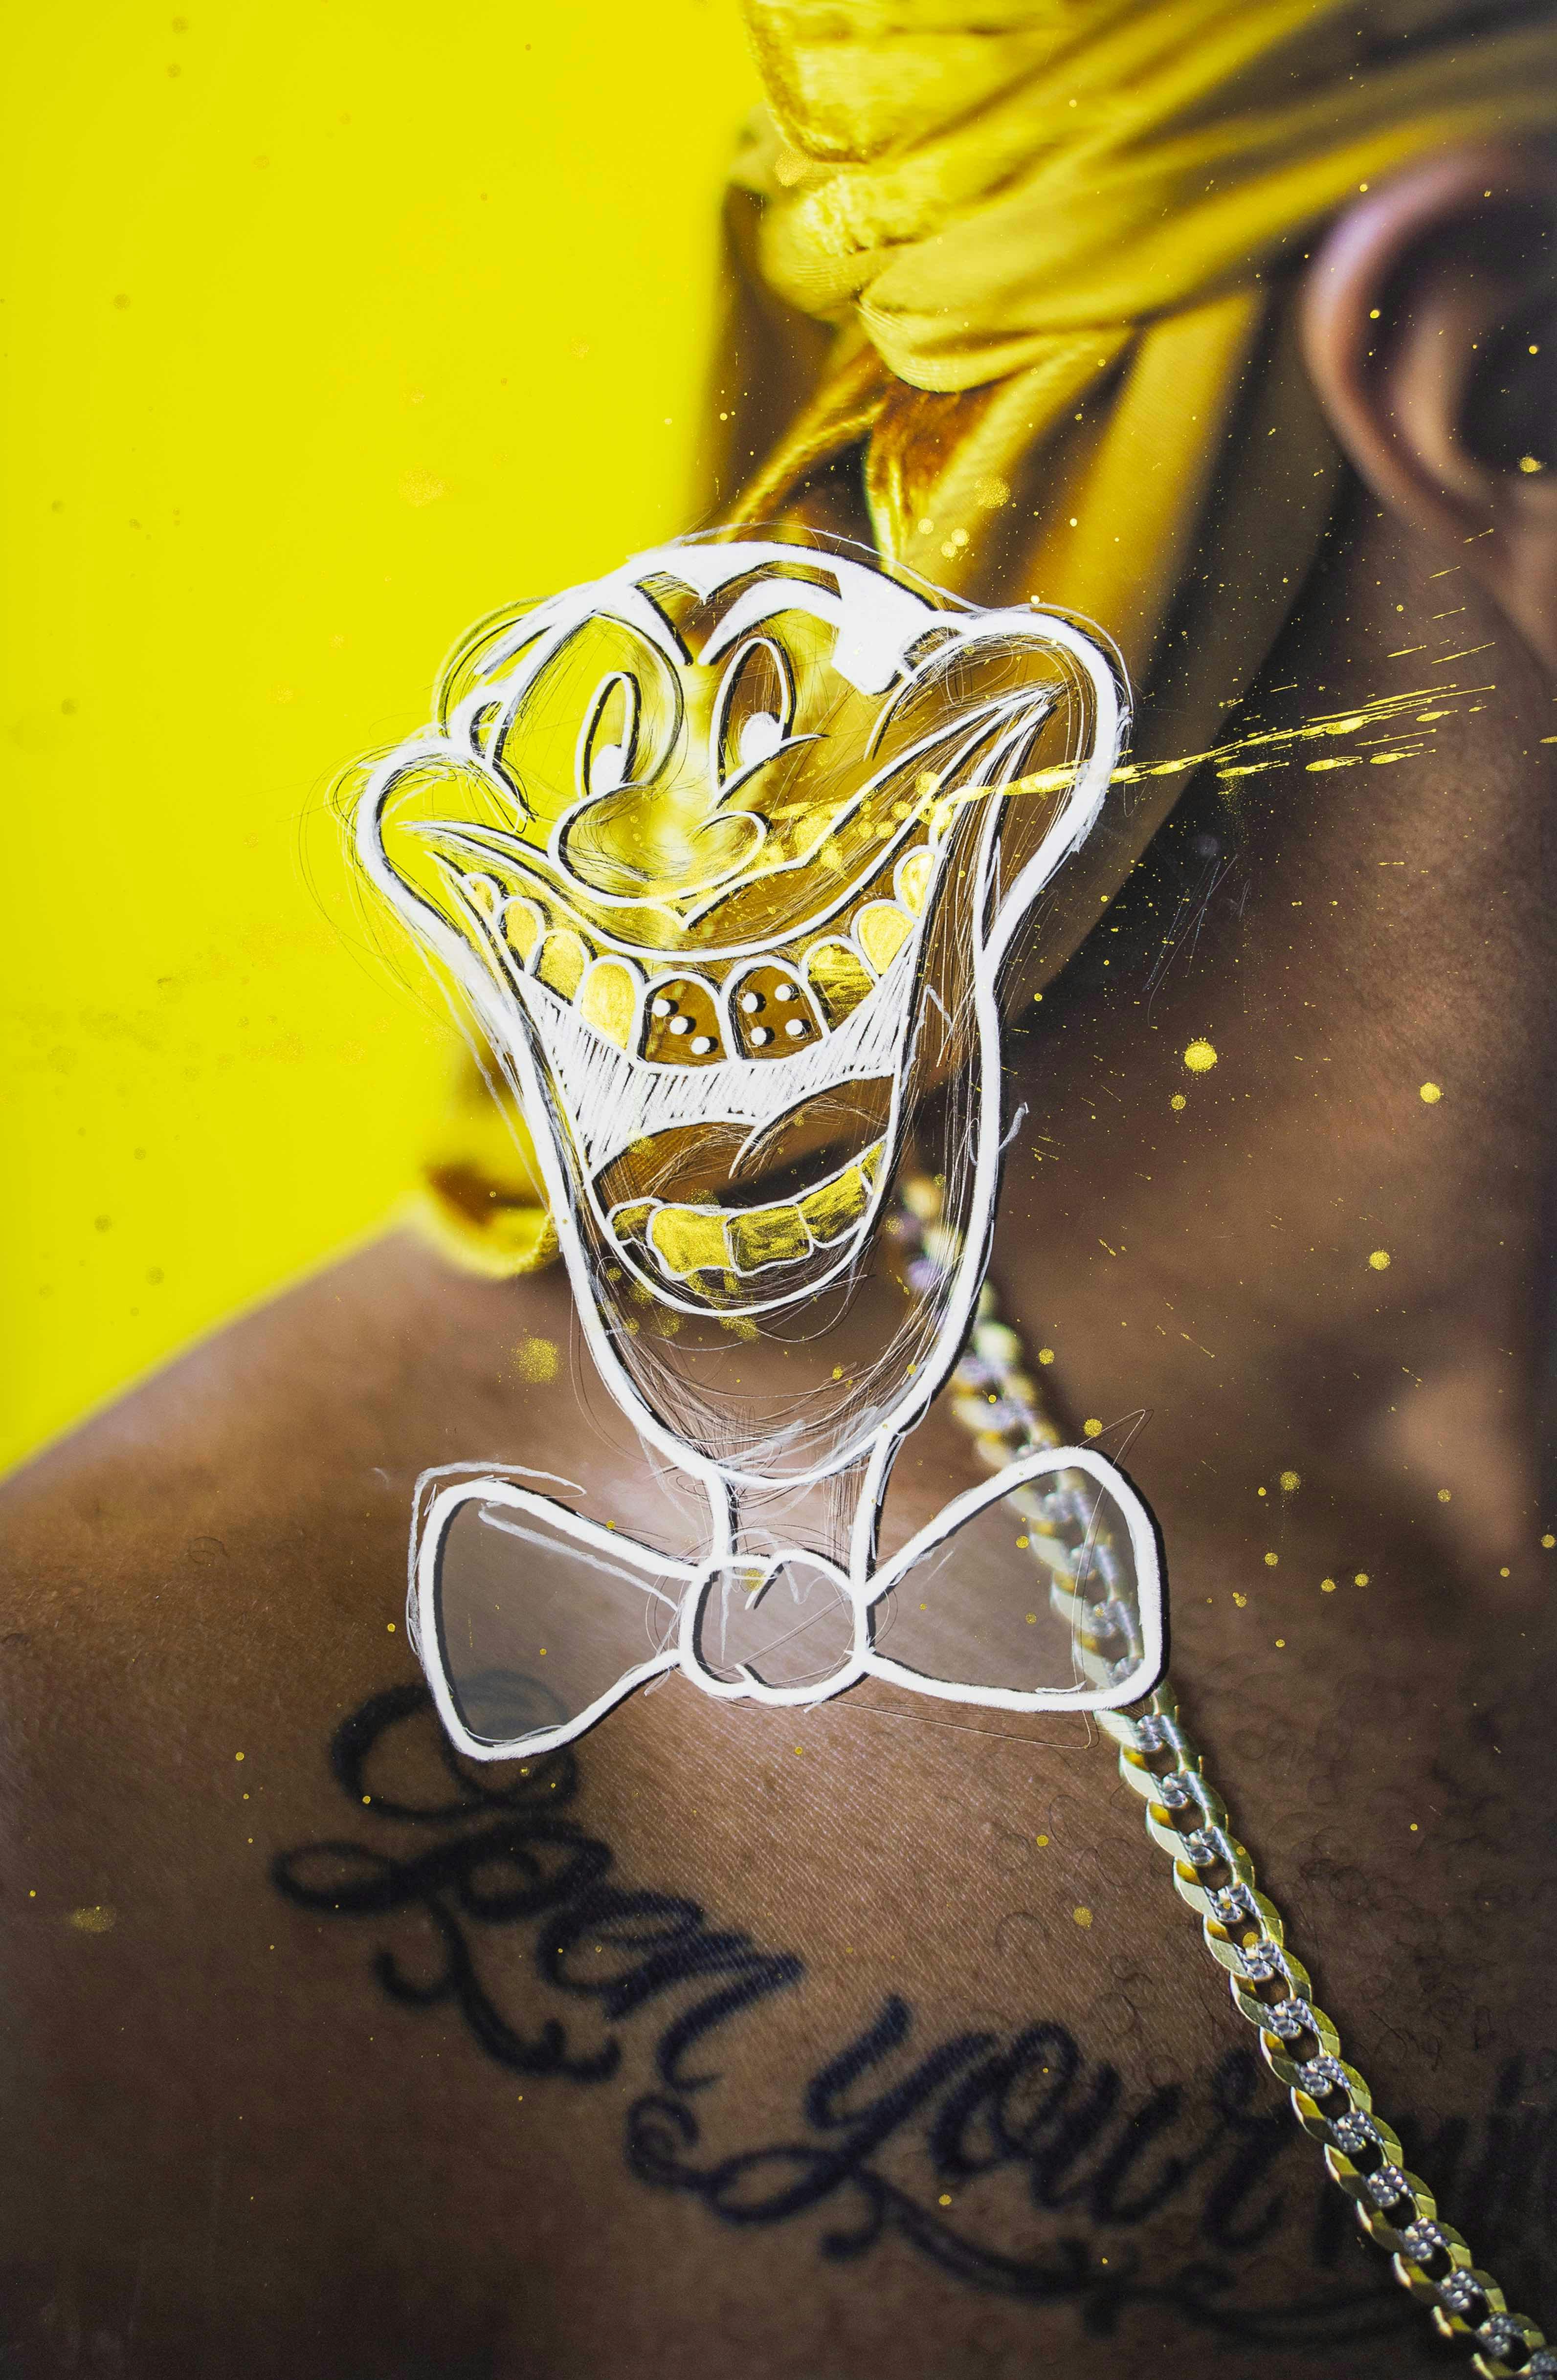 Close-up image of a Black man's neck and shoulder, showing a tattoo and a yellow background and a caricature drawing on top. © André Ramos-Woodard